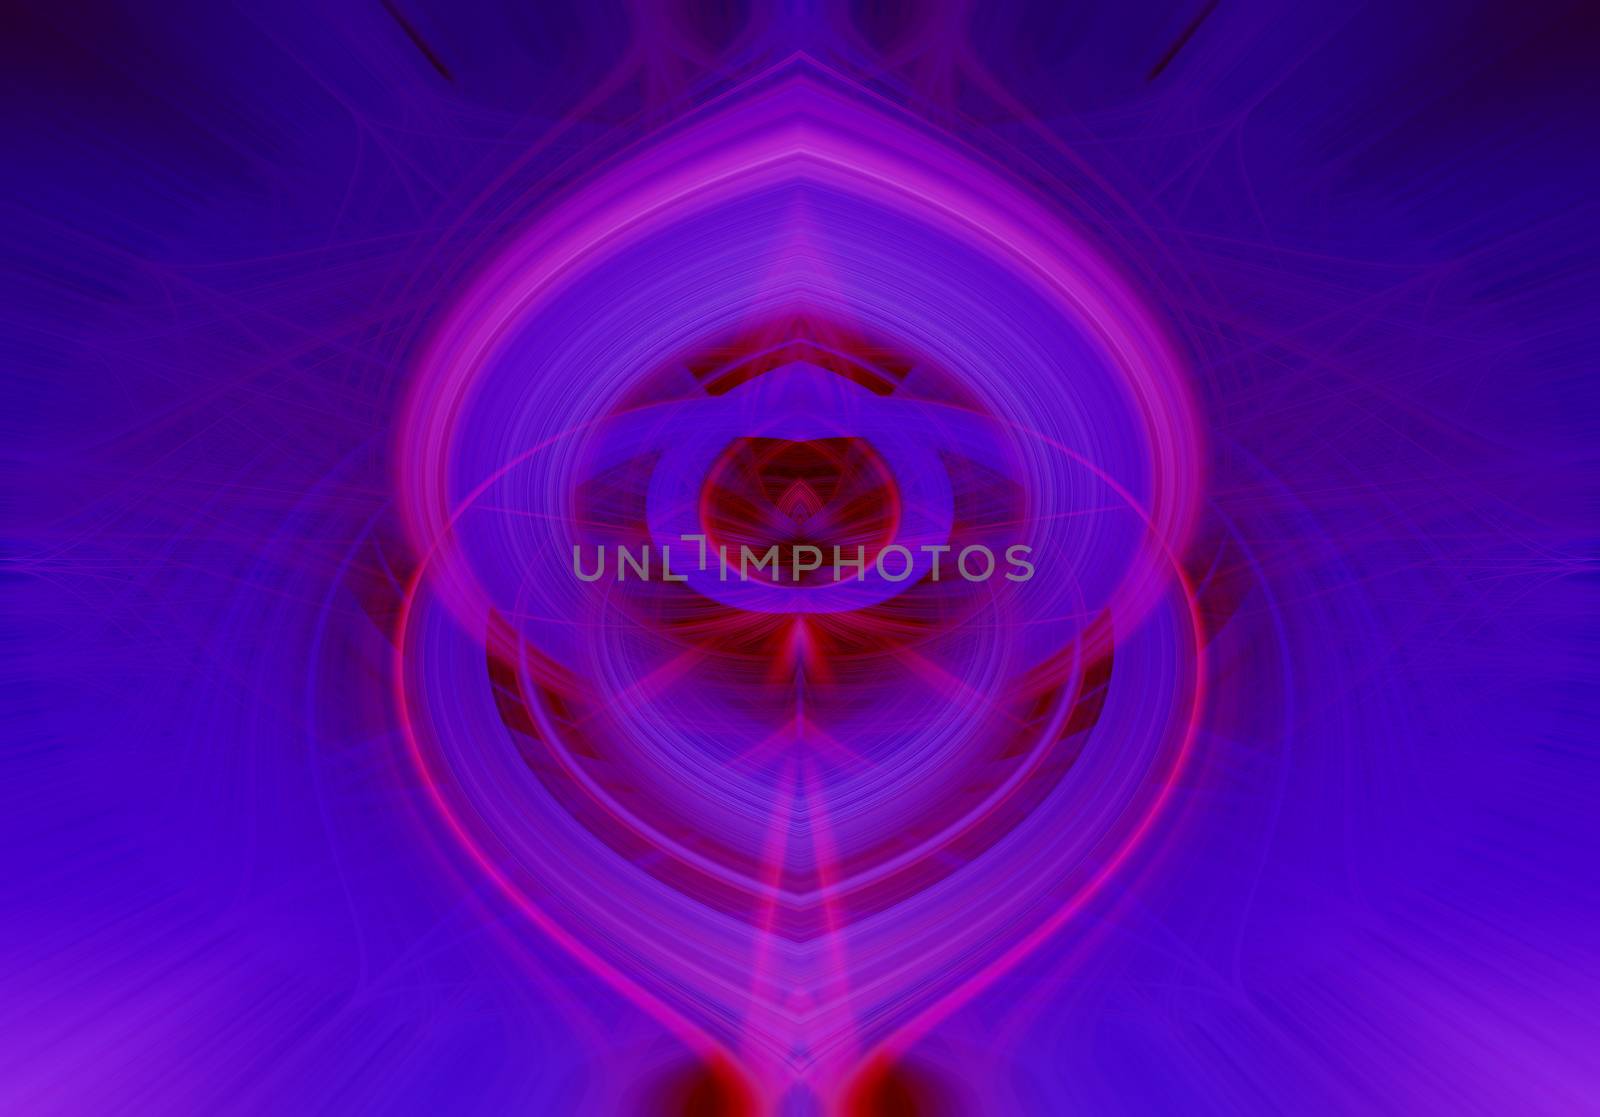 Beautiful abstract intertwined 3d fibers forming a shape of sparkle, flame, flower, interlinked hearts. Blue, maroon, pink, and purple colors. Illustration by DamantisZ